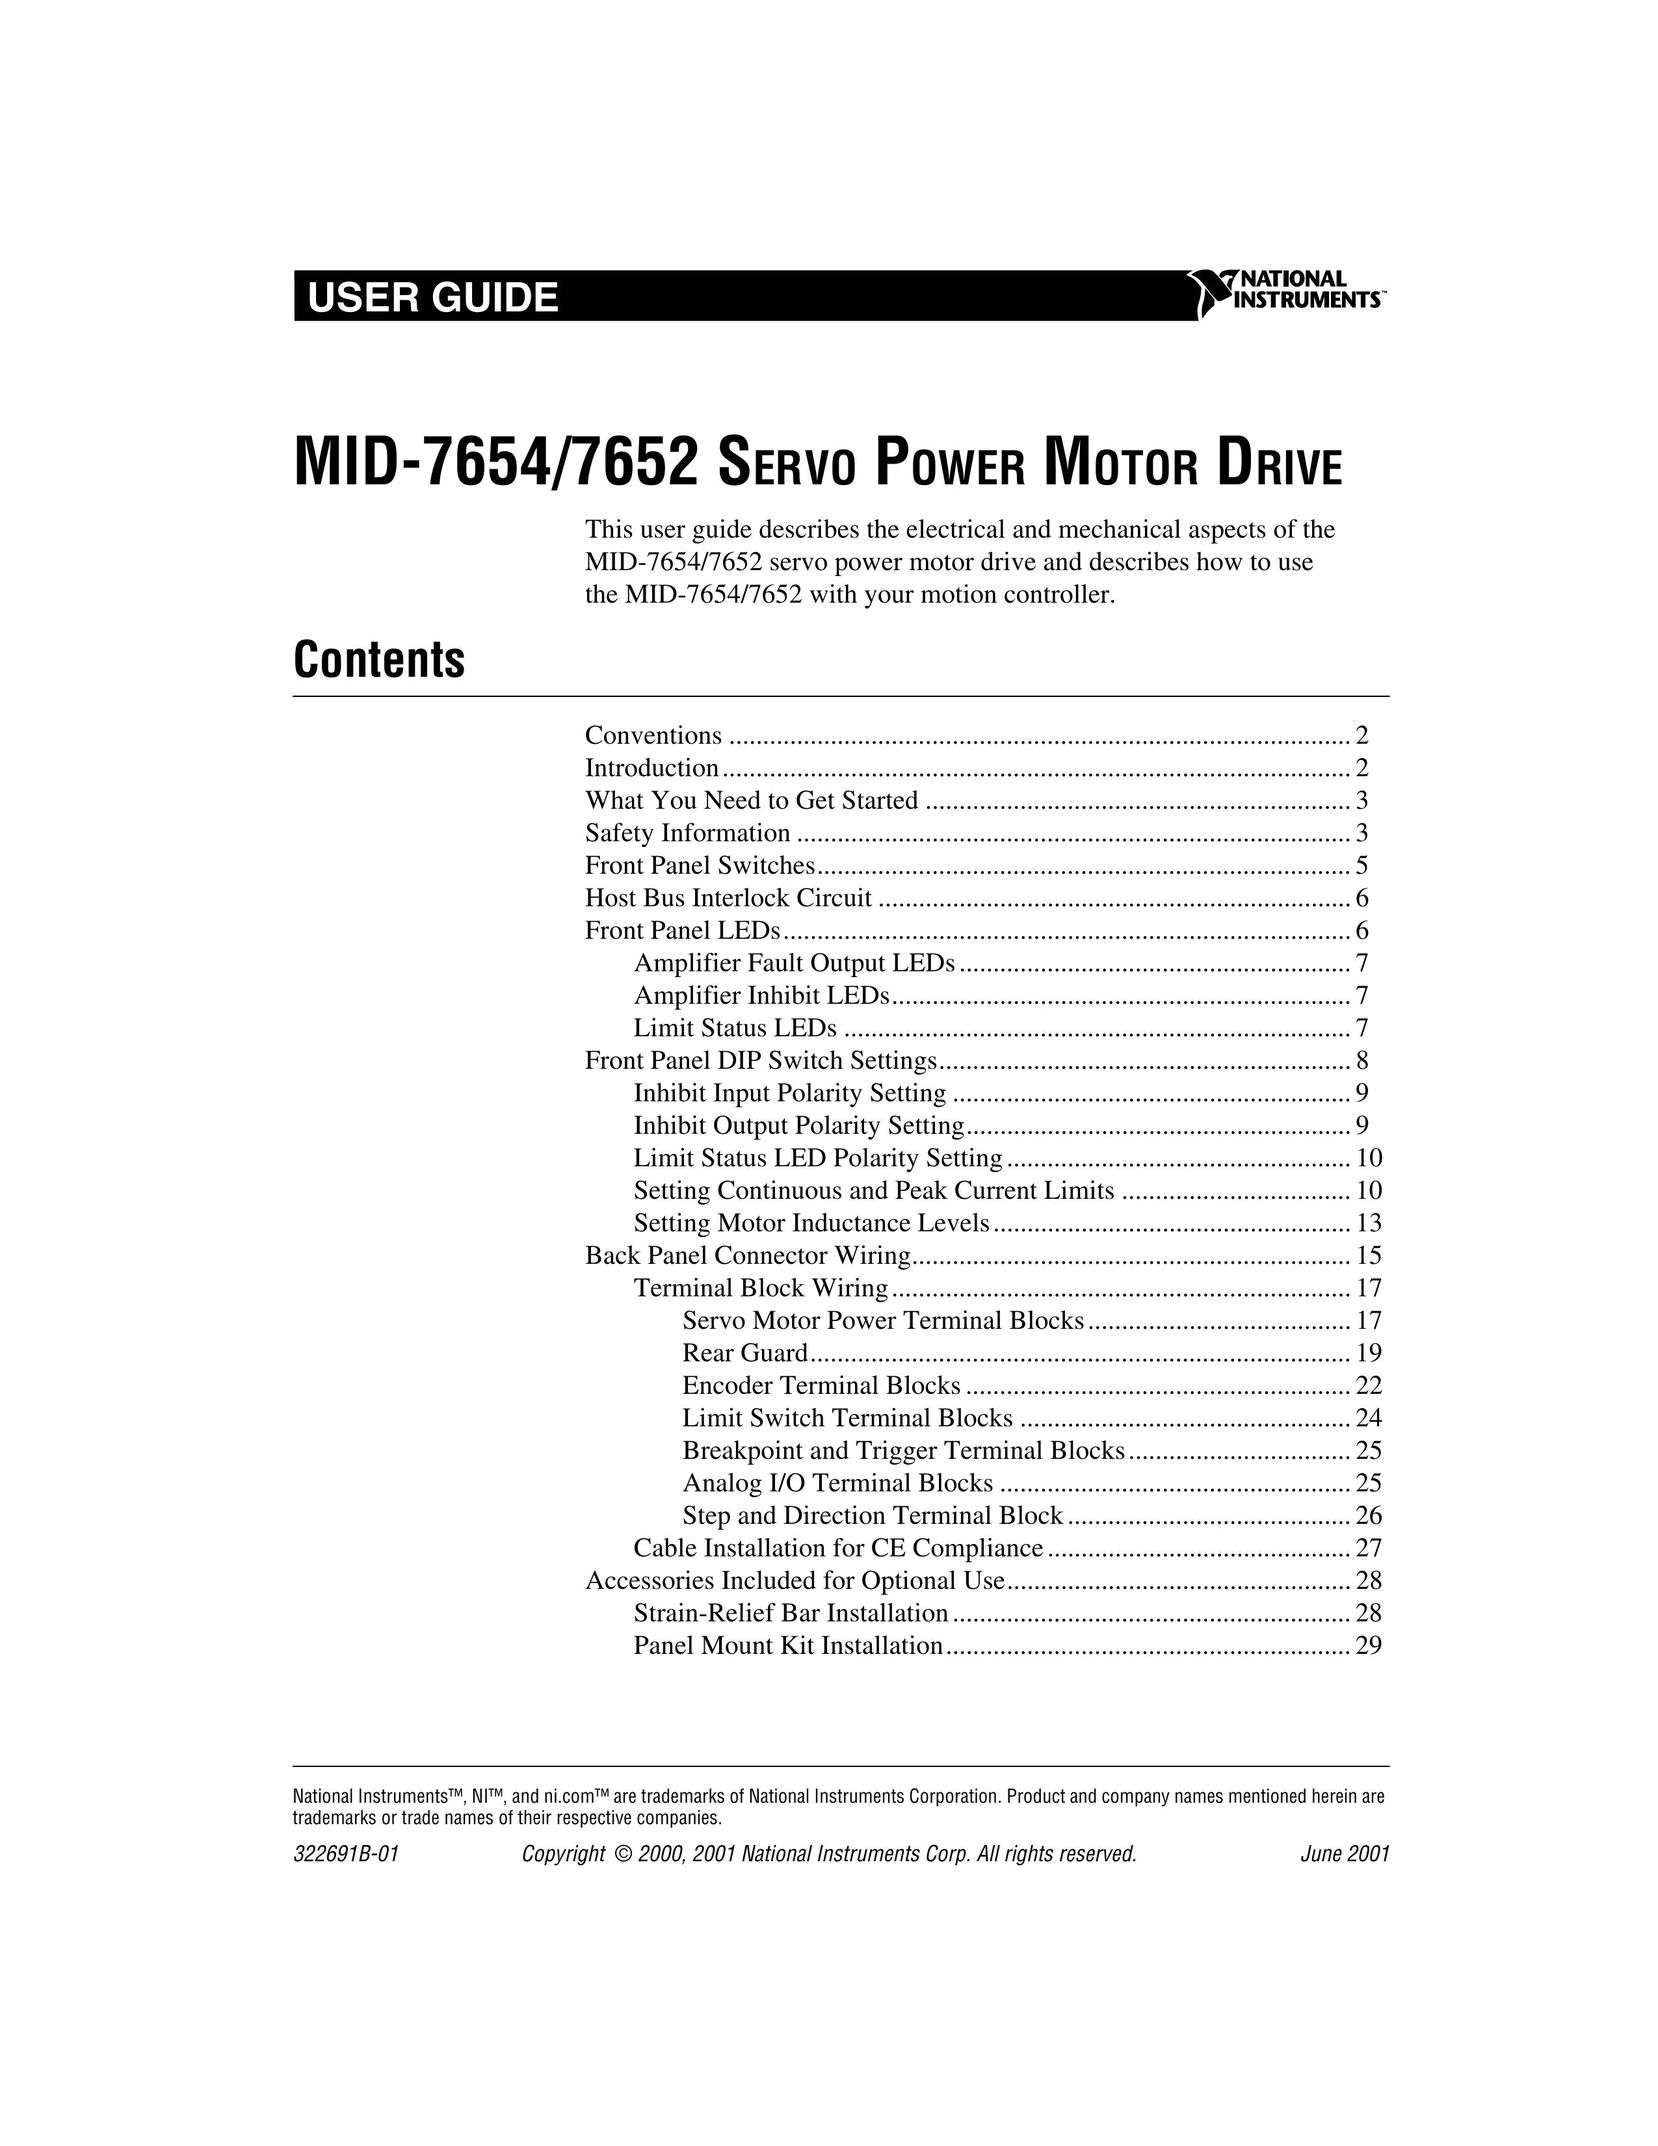 National Instruments MID-7654 Impact Driver User Manual